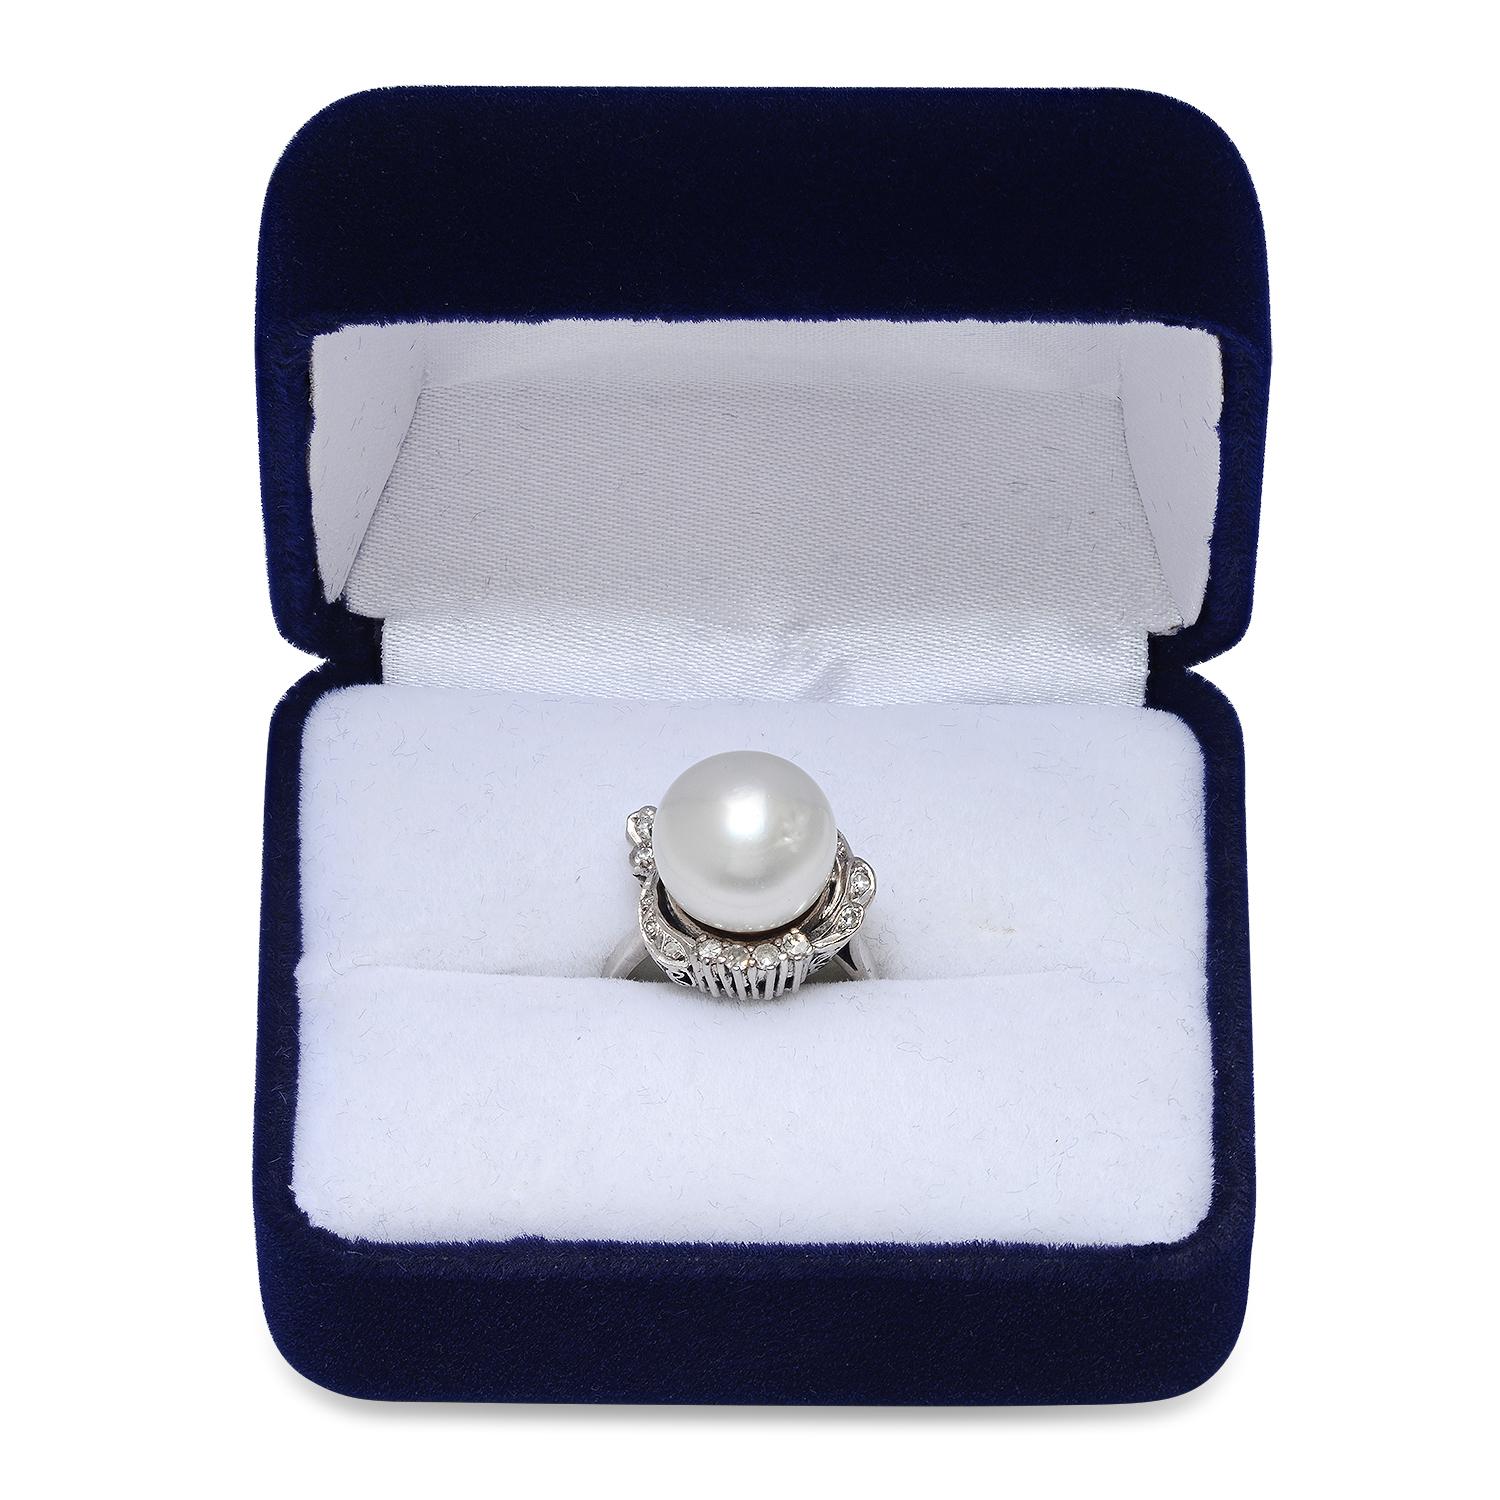 18K White Gold Setting with one 12mm White South Sea Pearl and 0.22ct Diamond Ladies Ring